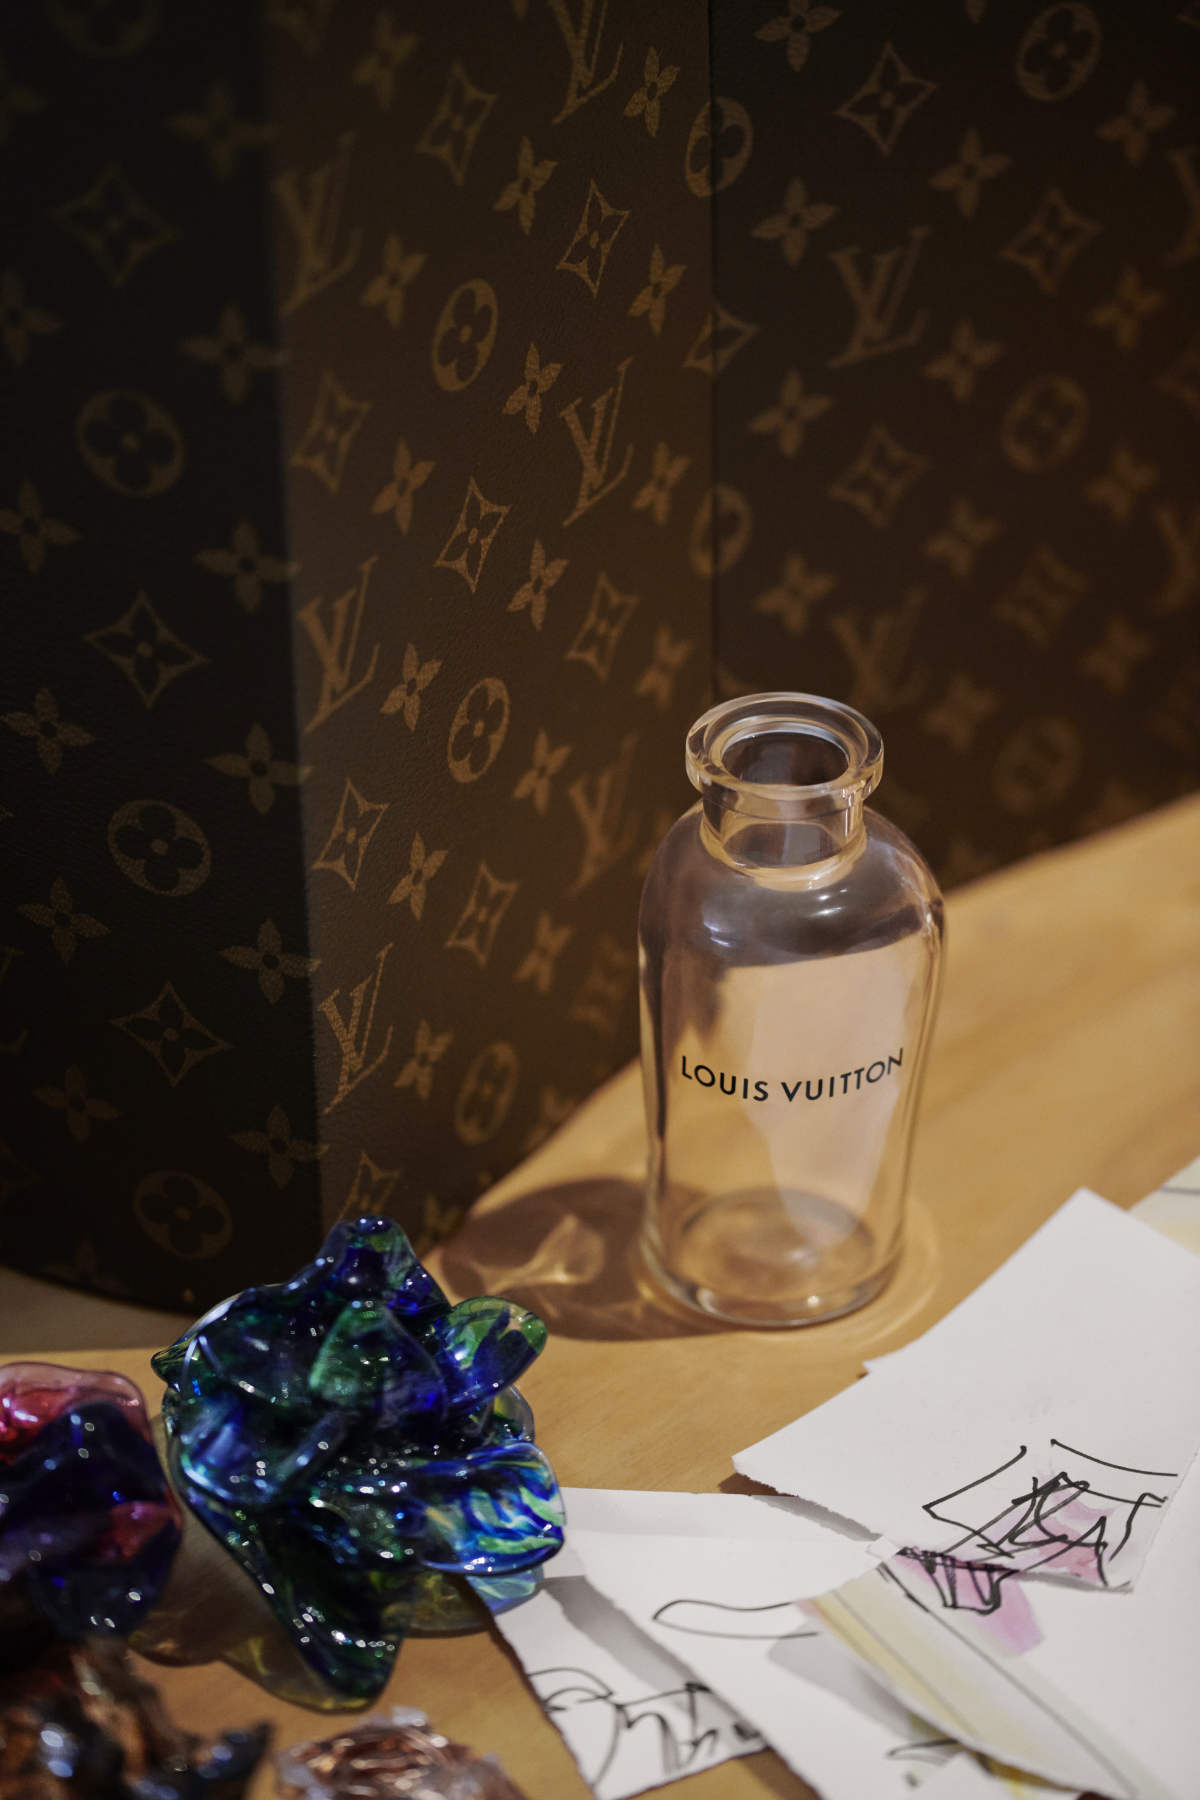 Frank Gehry x Louis Vuitton Fragrance Collection